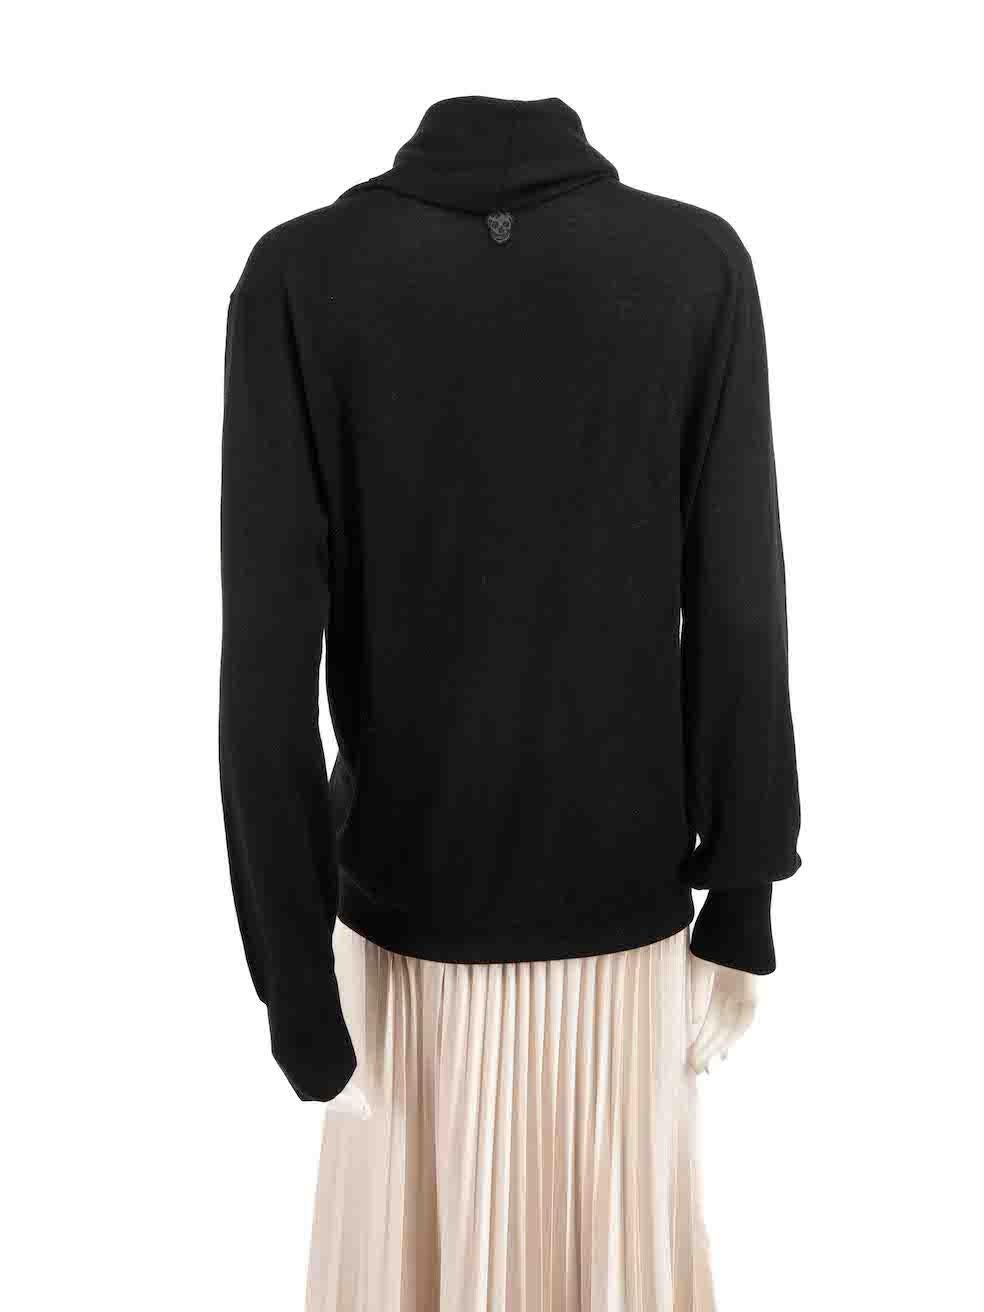 Alexander McQueen Black Wool Draped V-Neck Jumper Size M In Good Condition For Sale In London, GB